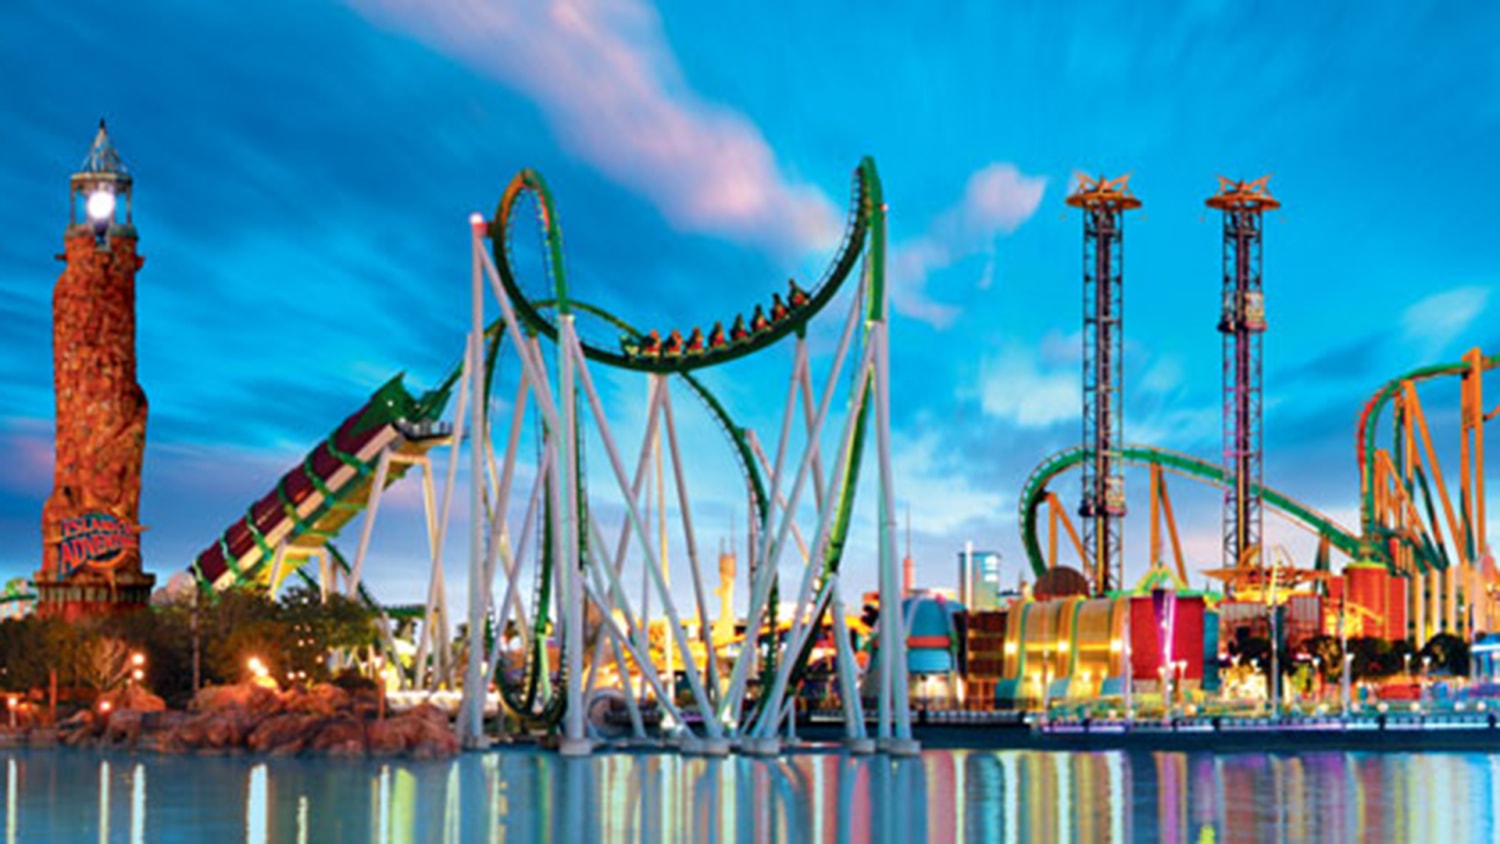 10 Best Amusement Parks And Theme Parks In Tennessee, USA